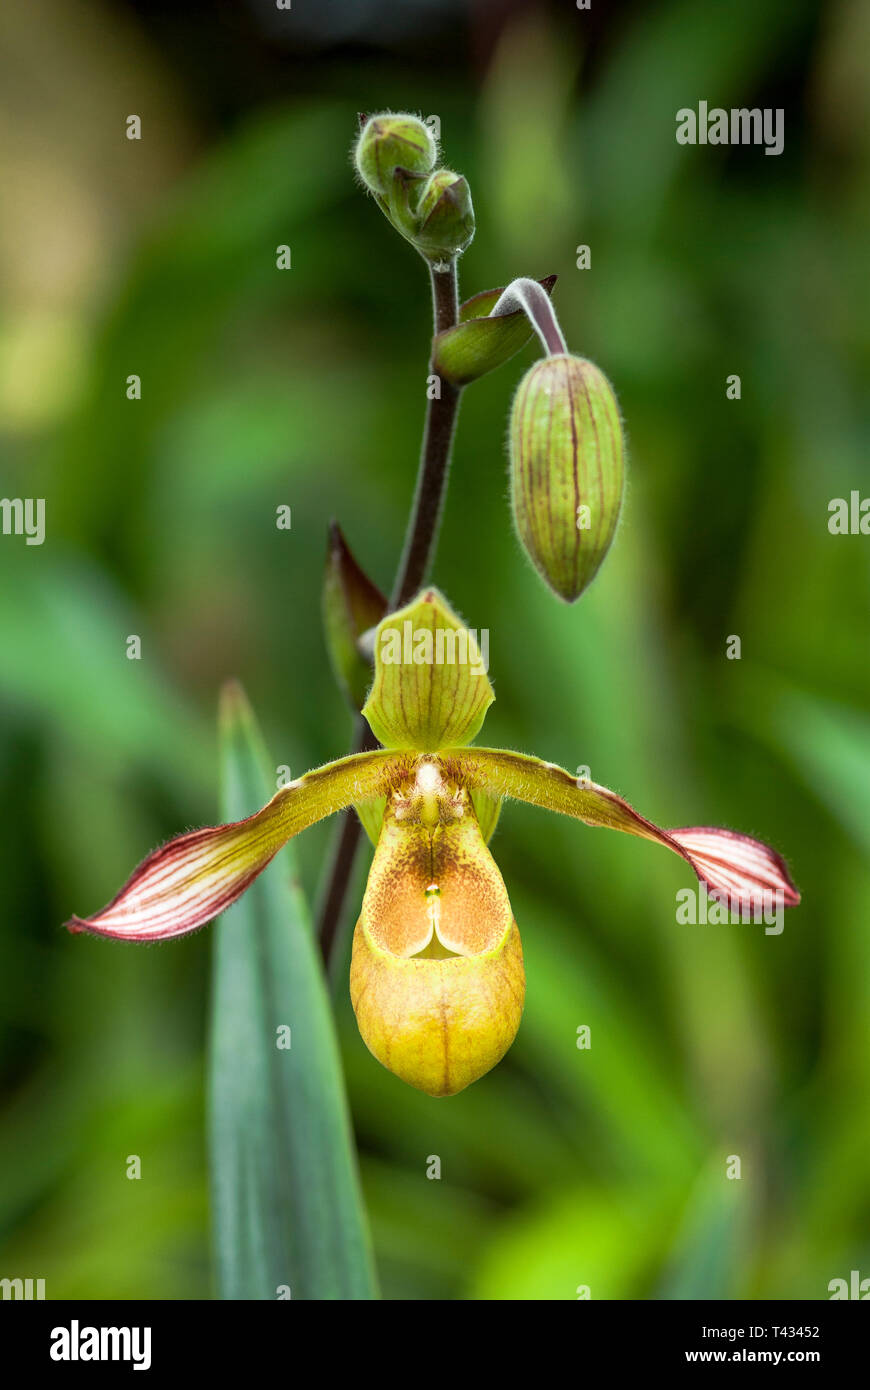 Flower head, buds, and leaf of Venus slipper, lady slipper orchid, full frontal Stock Photo